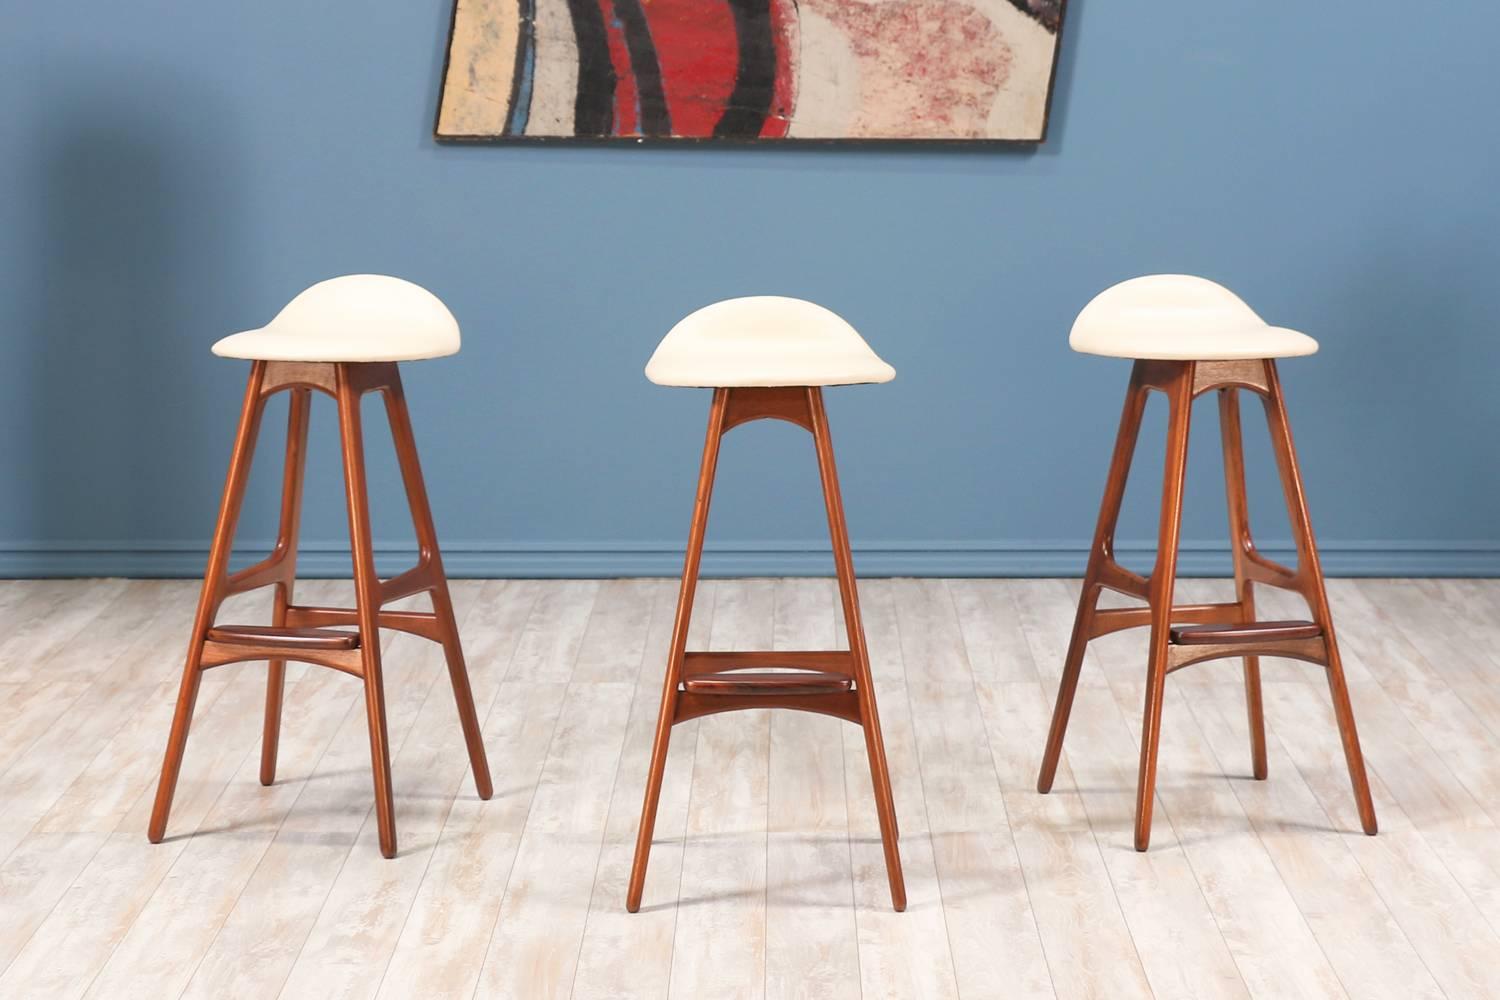 Set of three model 61 bar stools designed by Erik Buch for Oddense Maskinsnedkeri and manufactured in Denmark circa 1960’s. Each stool features a streamline design with a solid teak wood frame, gorgeous contrasting rosewood footrest and a sculpted